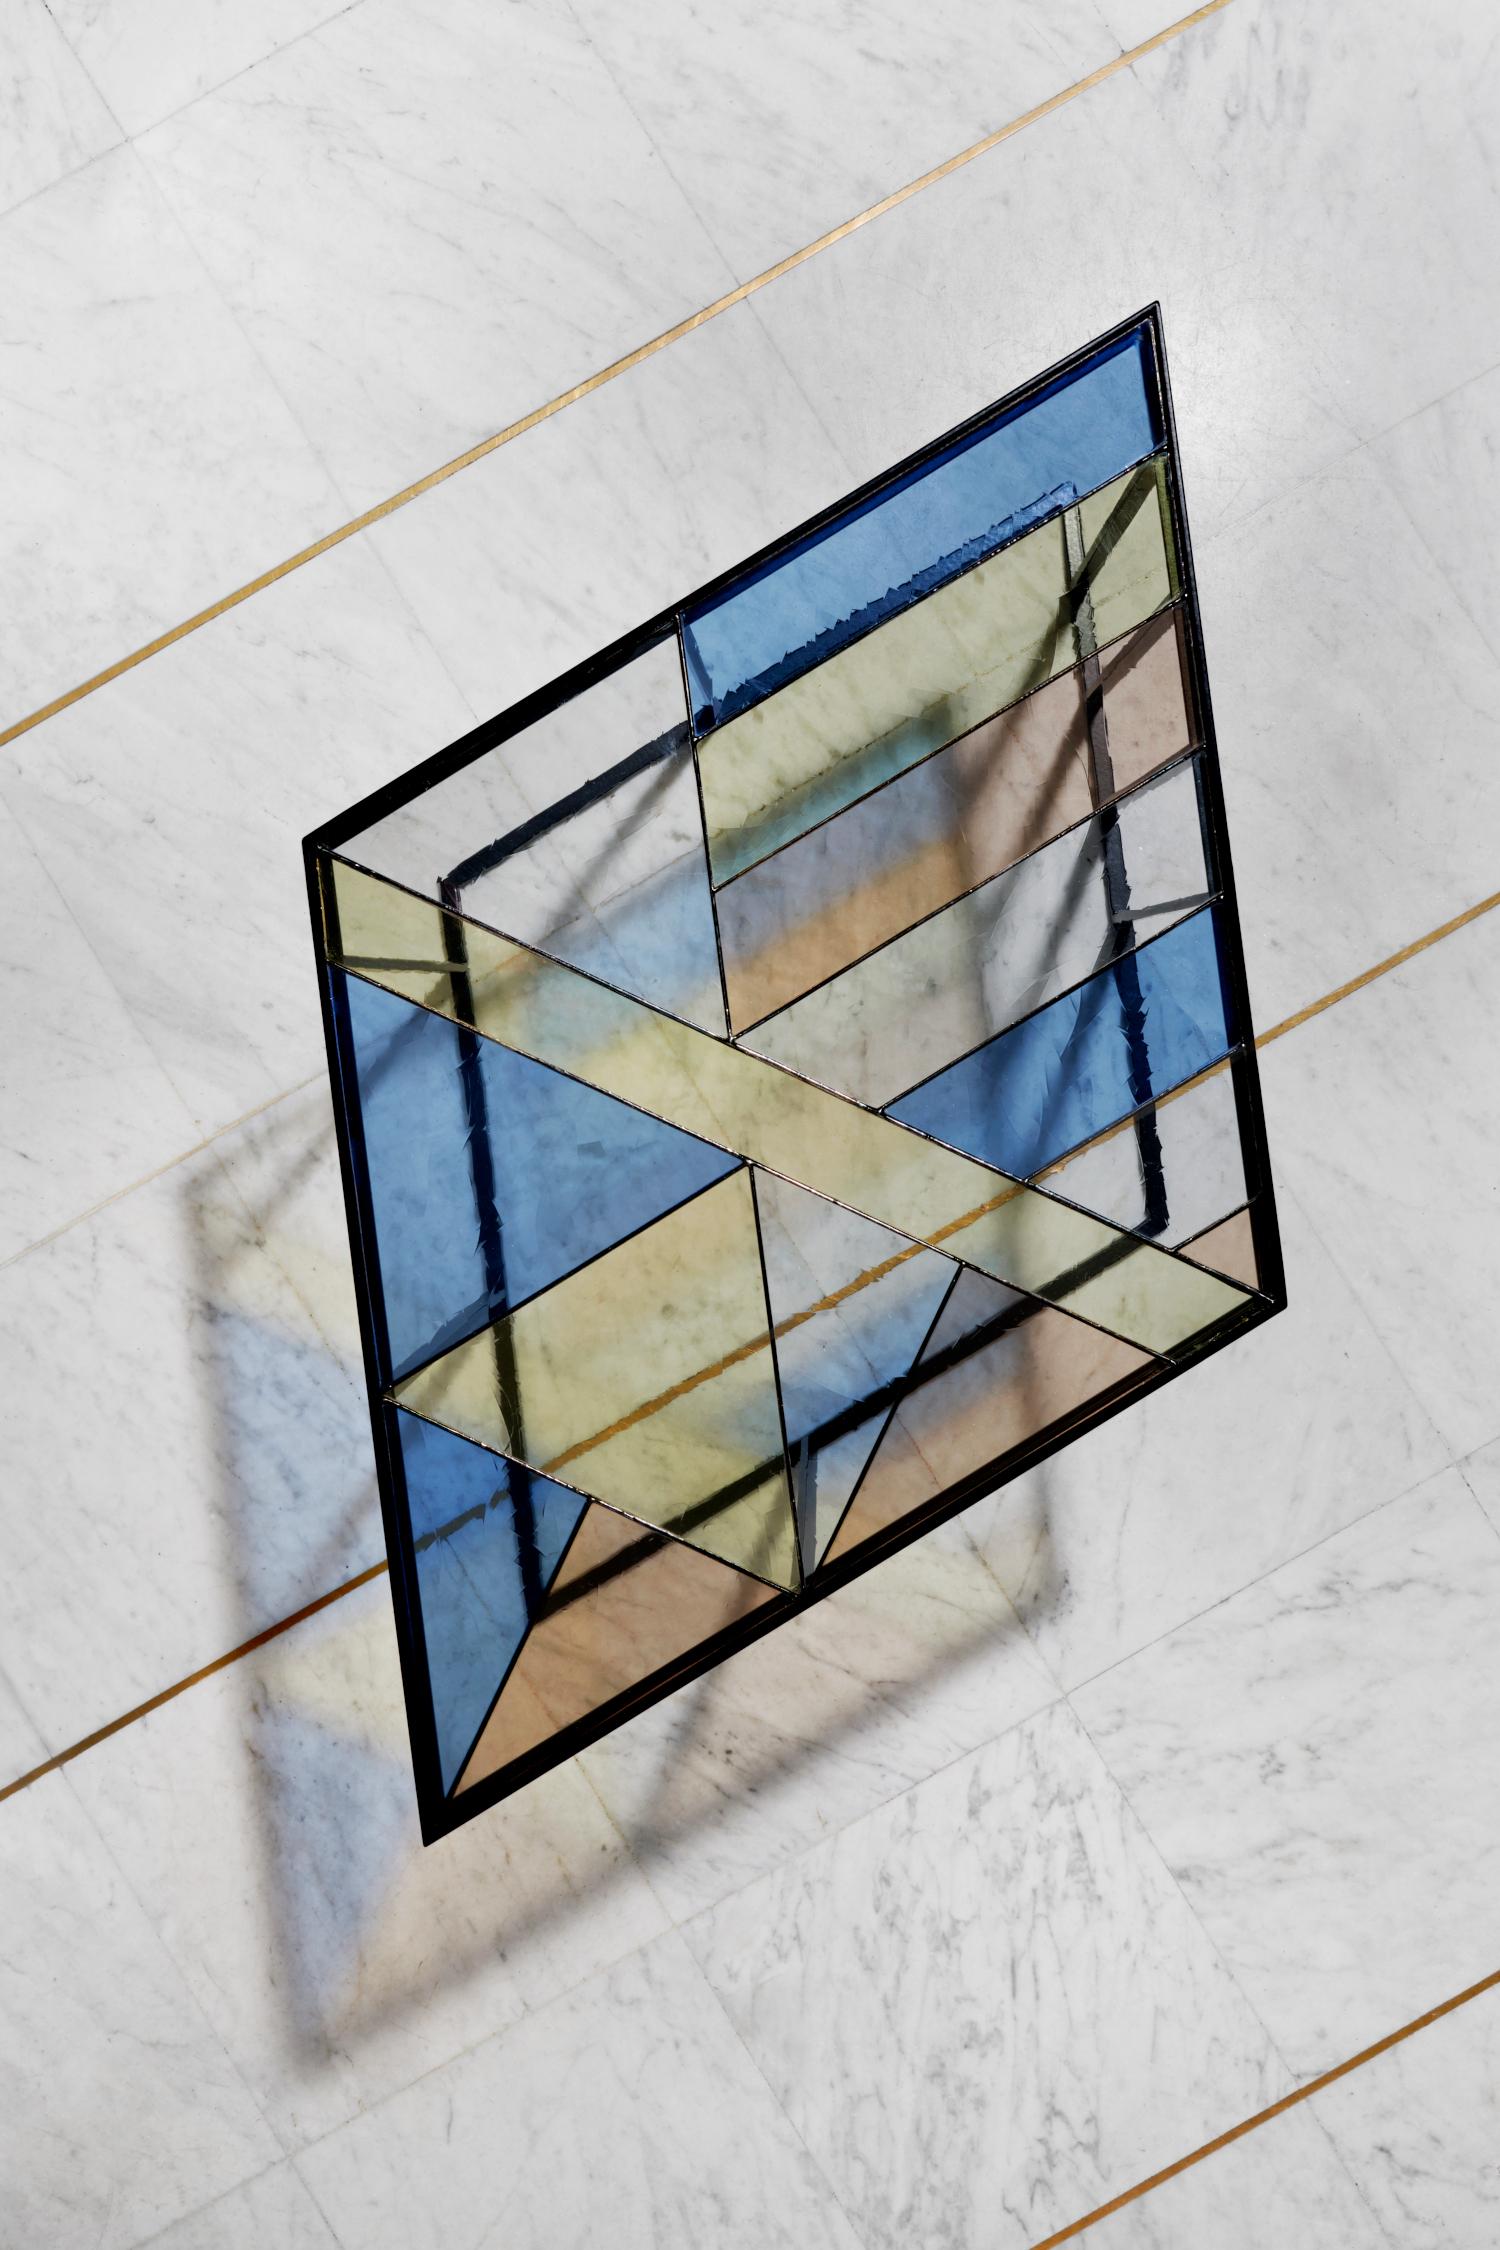 Serena Confalonieri's signed stained glass coffee table.
Santissimi.
Stained glass table
2020.
Dimensions: 45 x 70.5 x 41.5 cm.
Limited Edition: 8.
Signed and numbered.

A collection made by three trays built with iron and stained glass, the